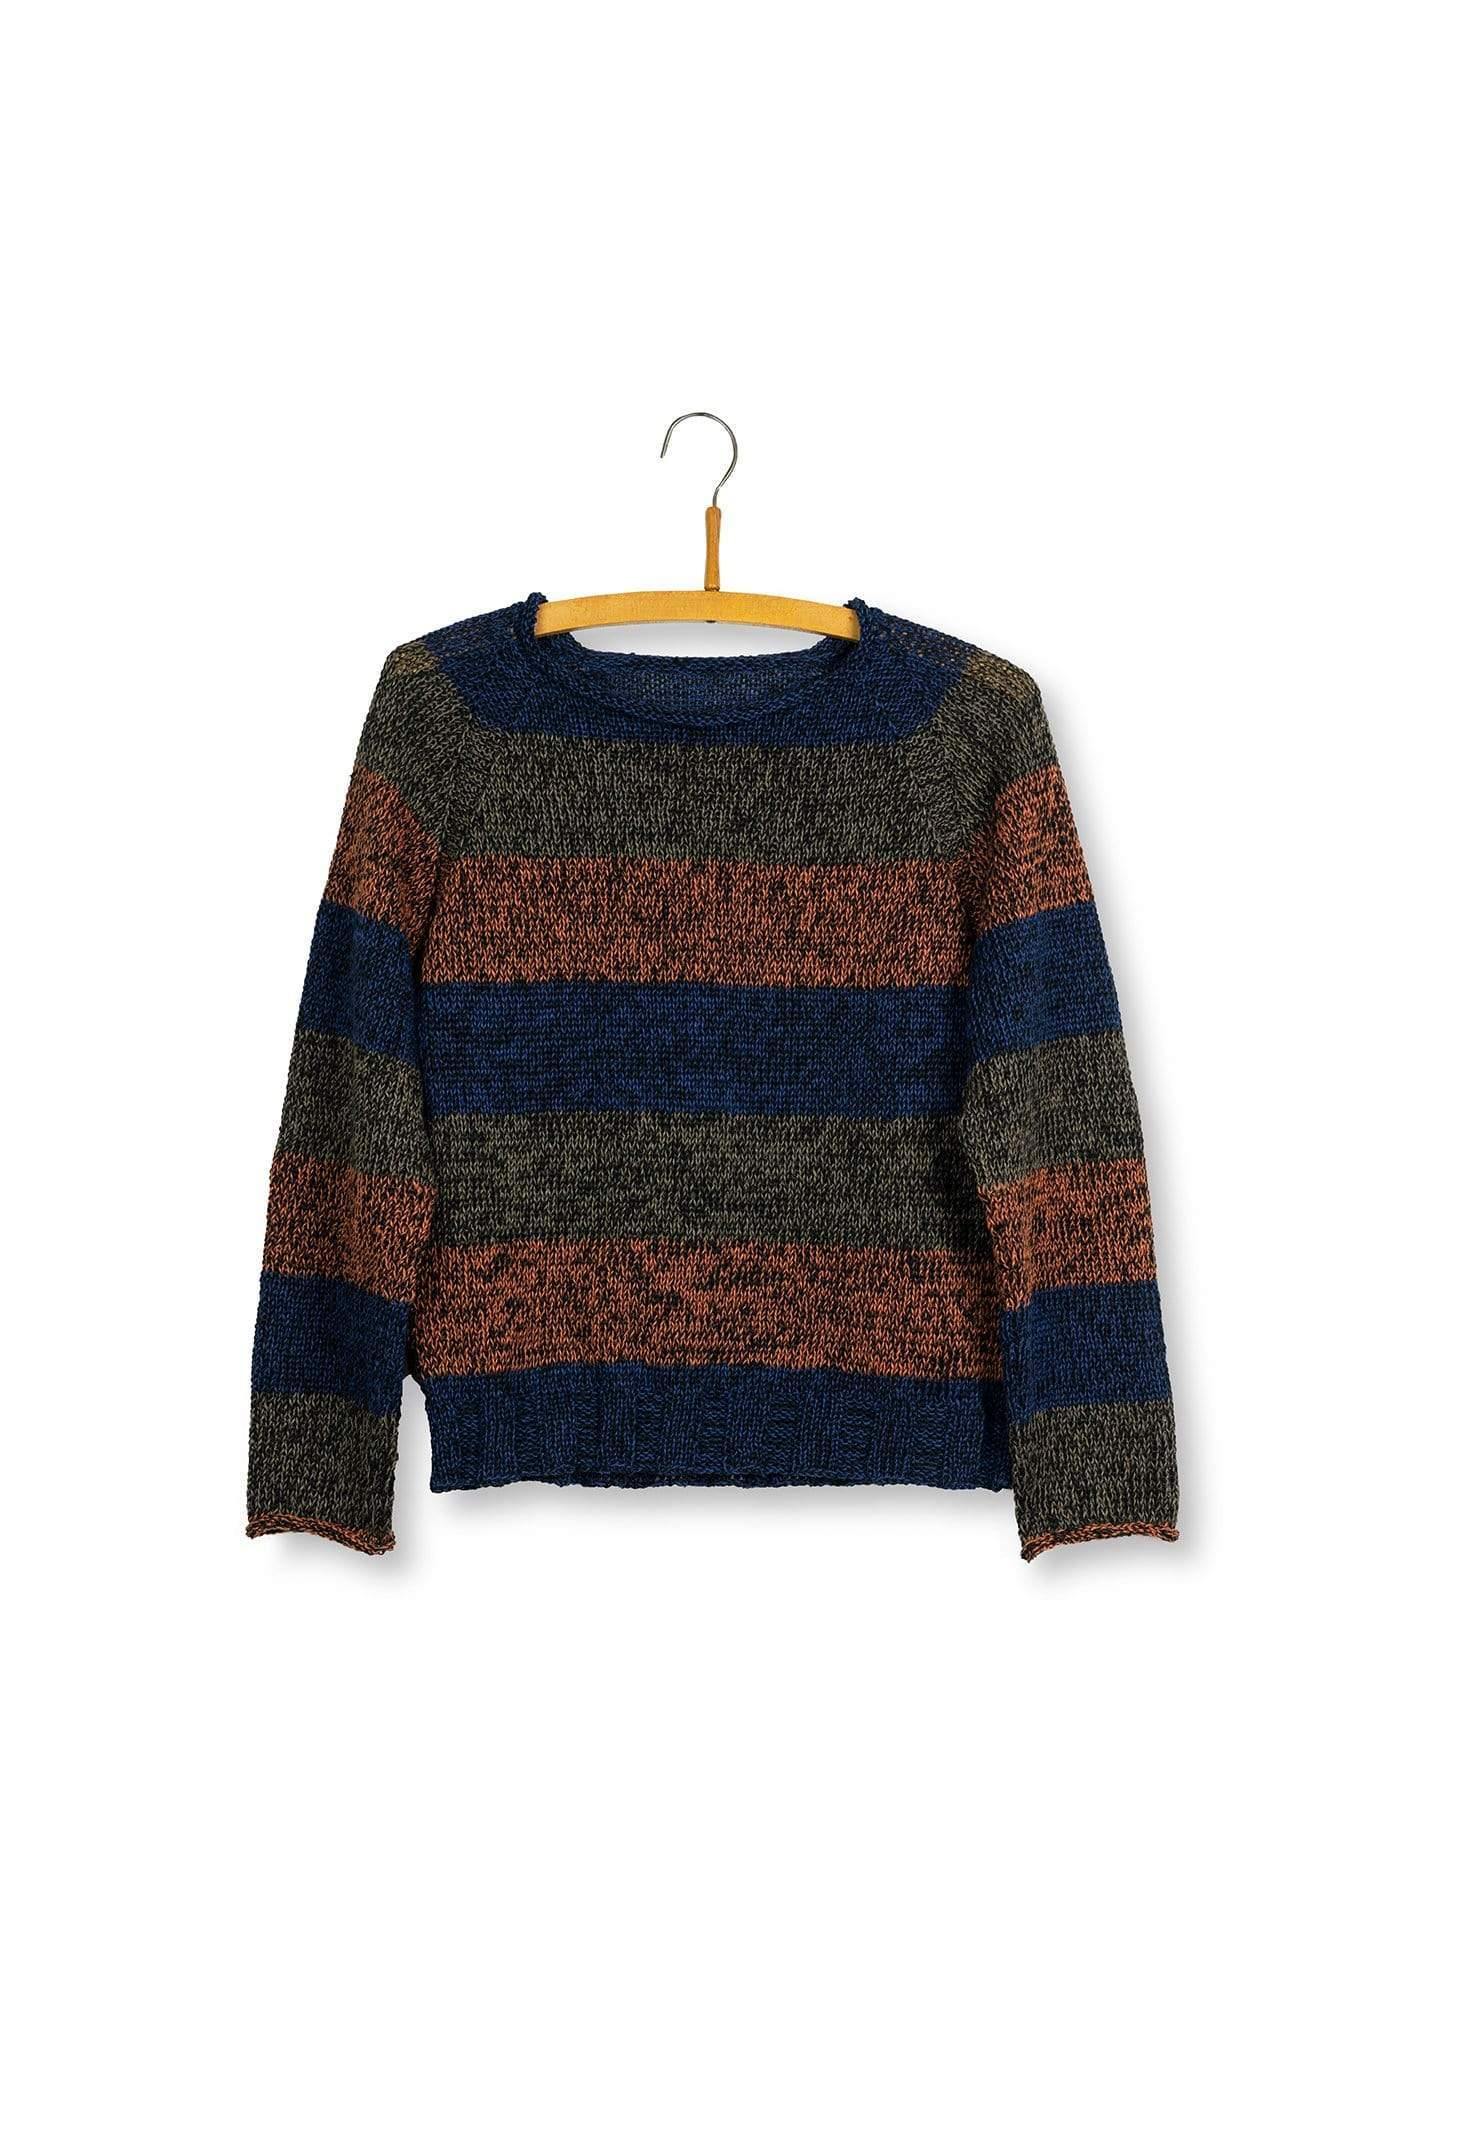 Palermo Sweater Pattern Isager